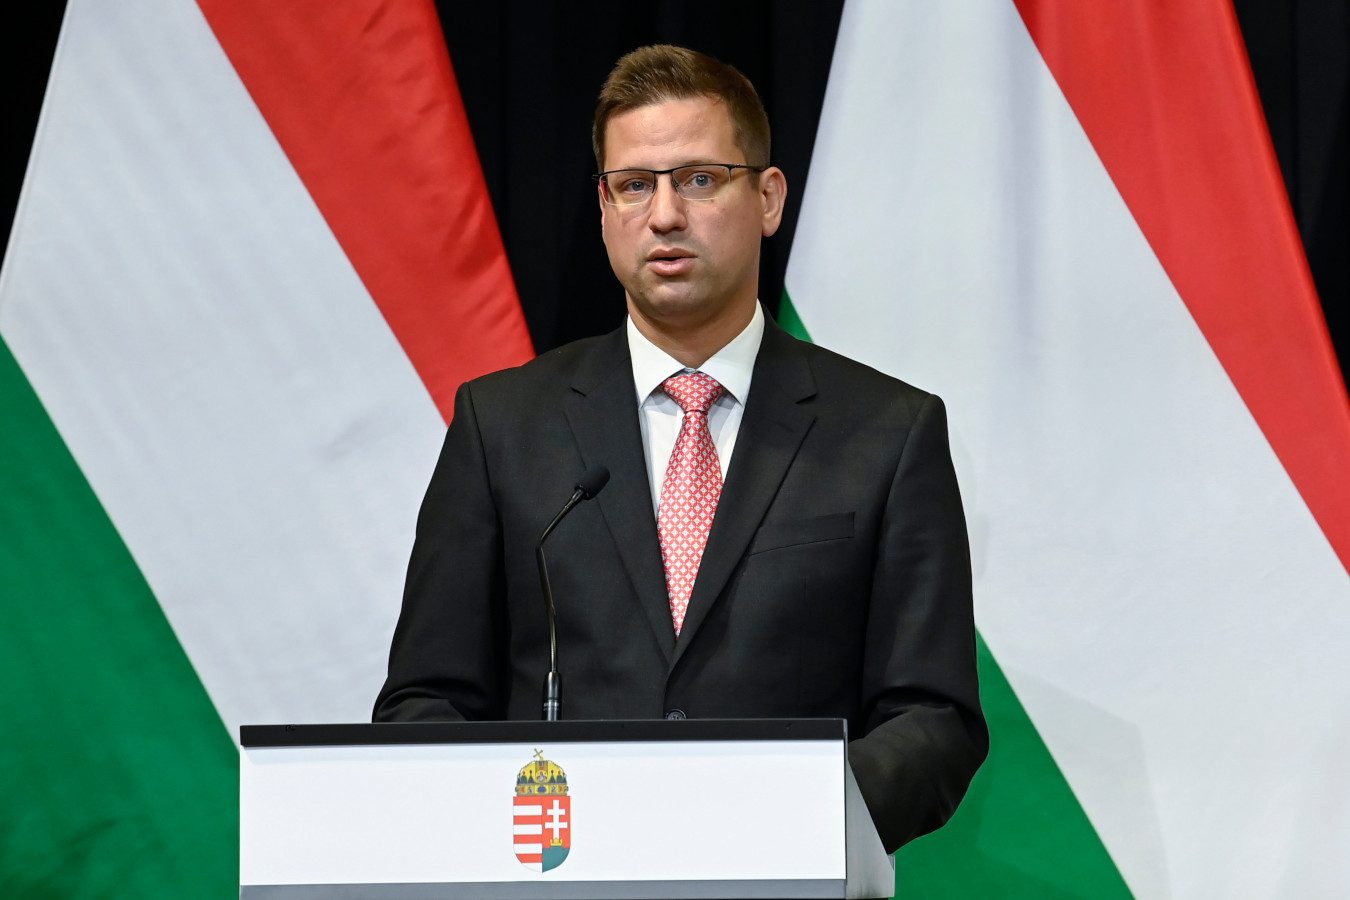 Hungary is 'Freer Than Western Europe', Claims Minister Gulyás